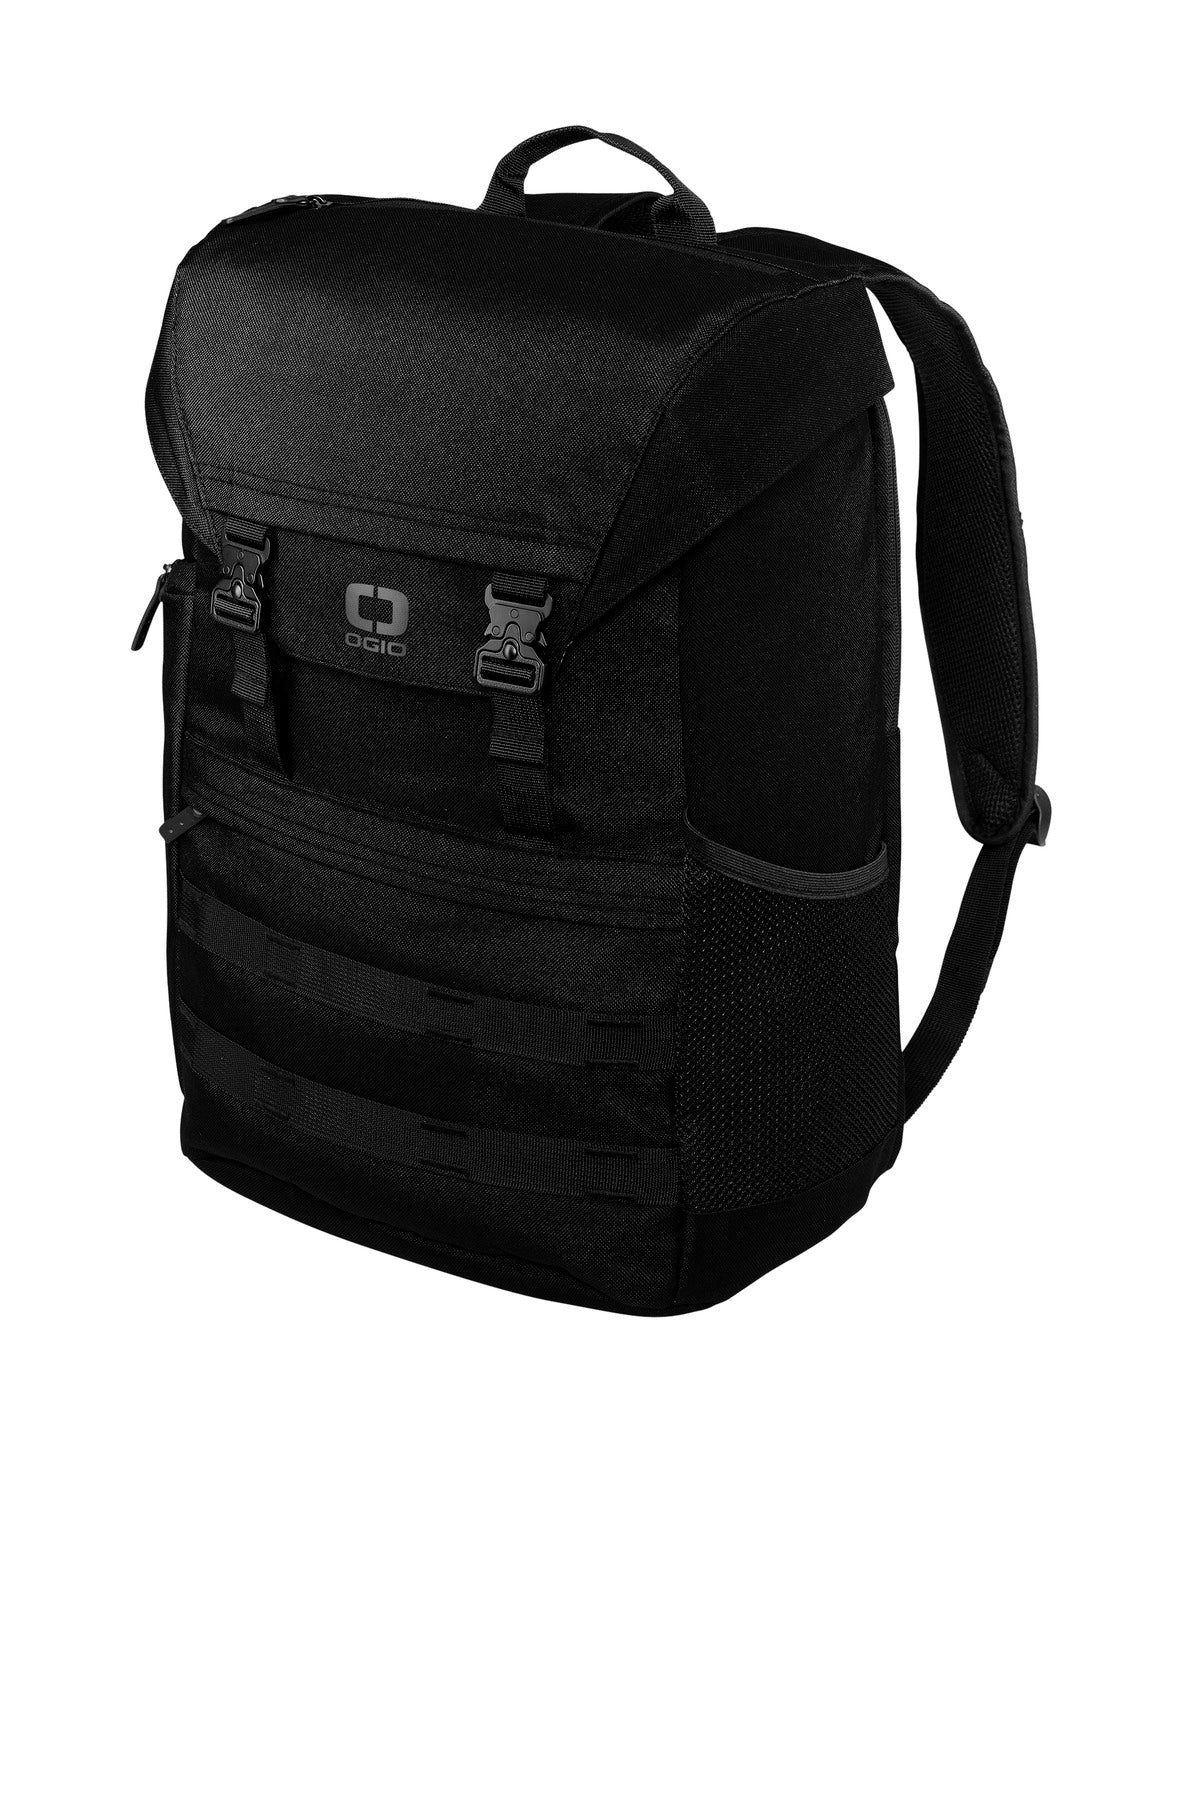 OGIO Command Pack 91019